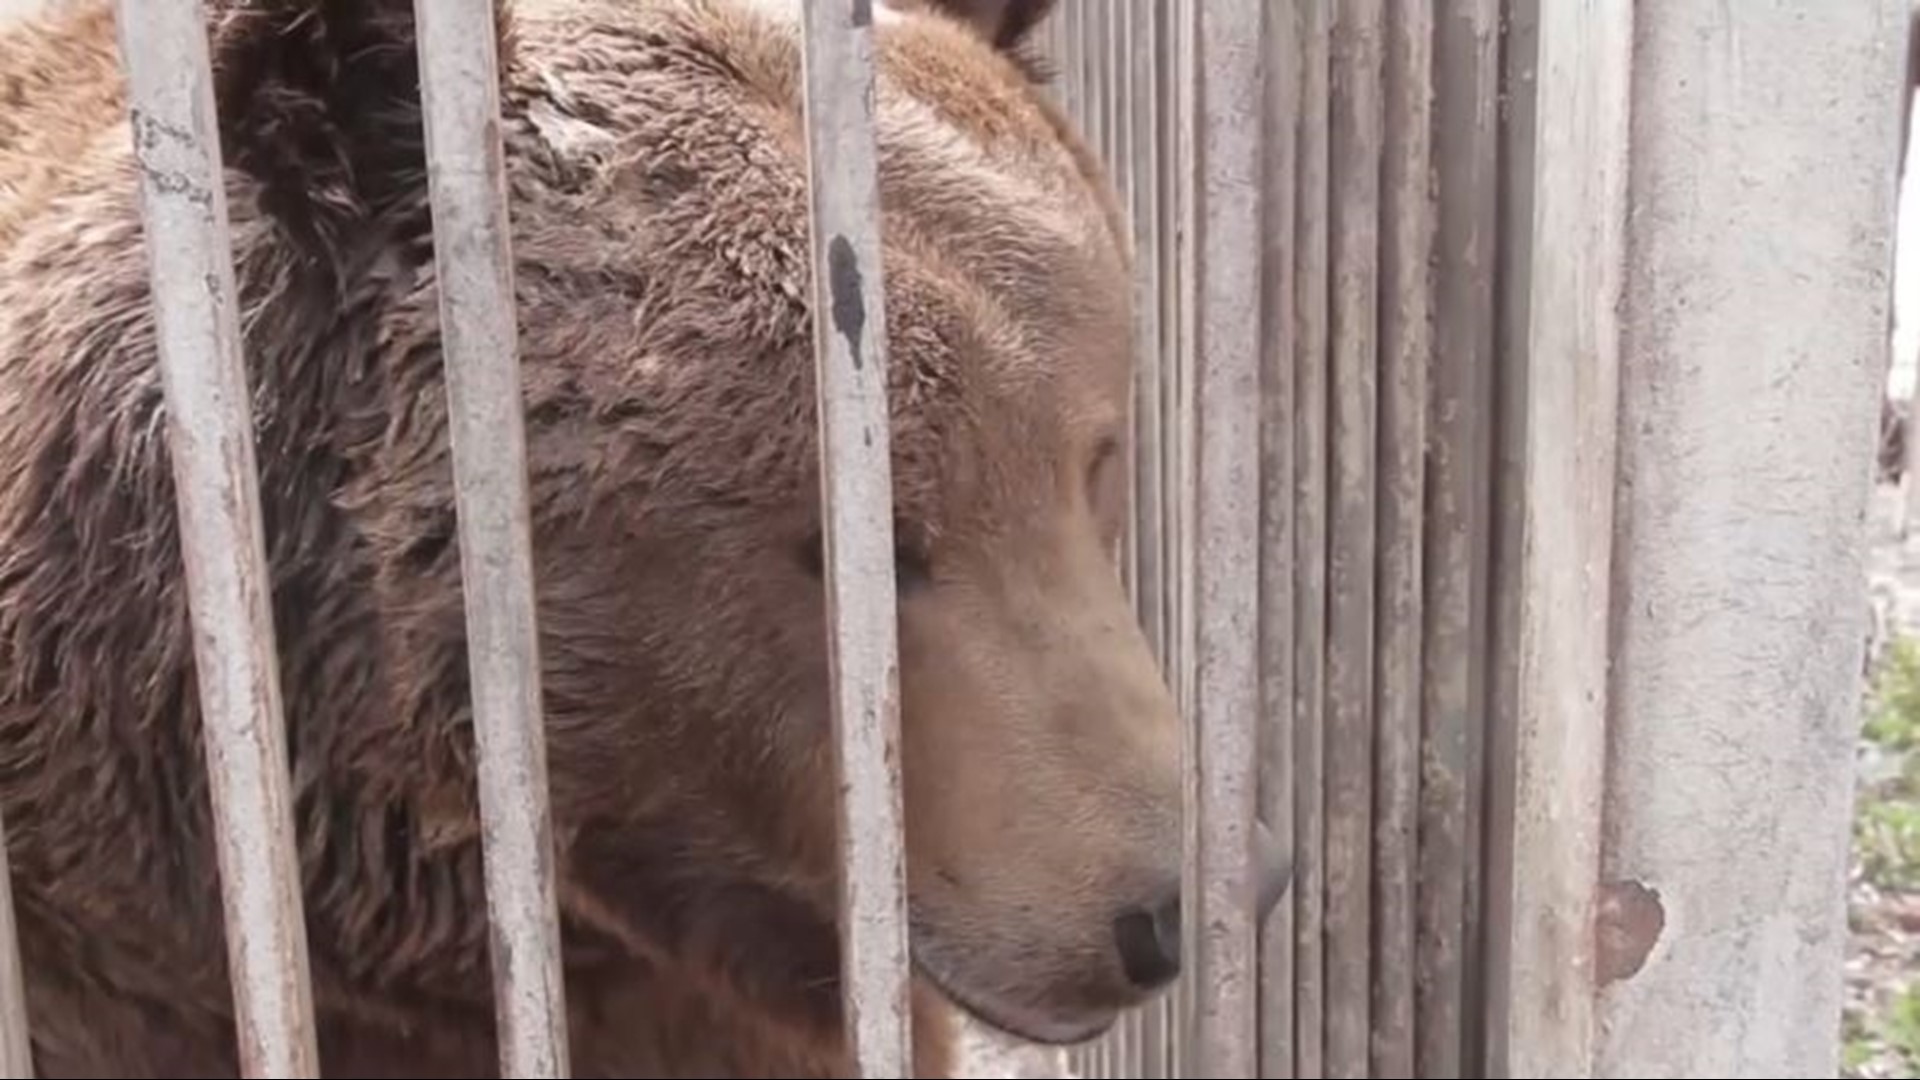 A private zoo in the besieged Ukrainian city of Mariupol has not escaped amid the Russian offensive, with animals caught in the crossfire of heavy shelling.